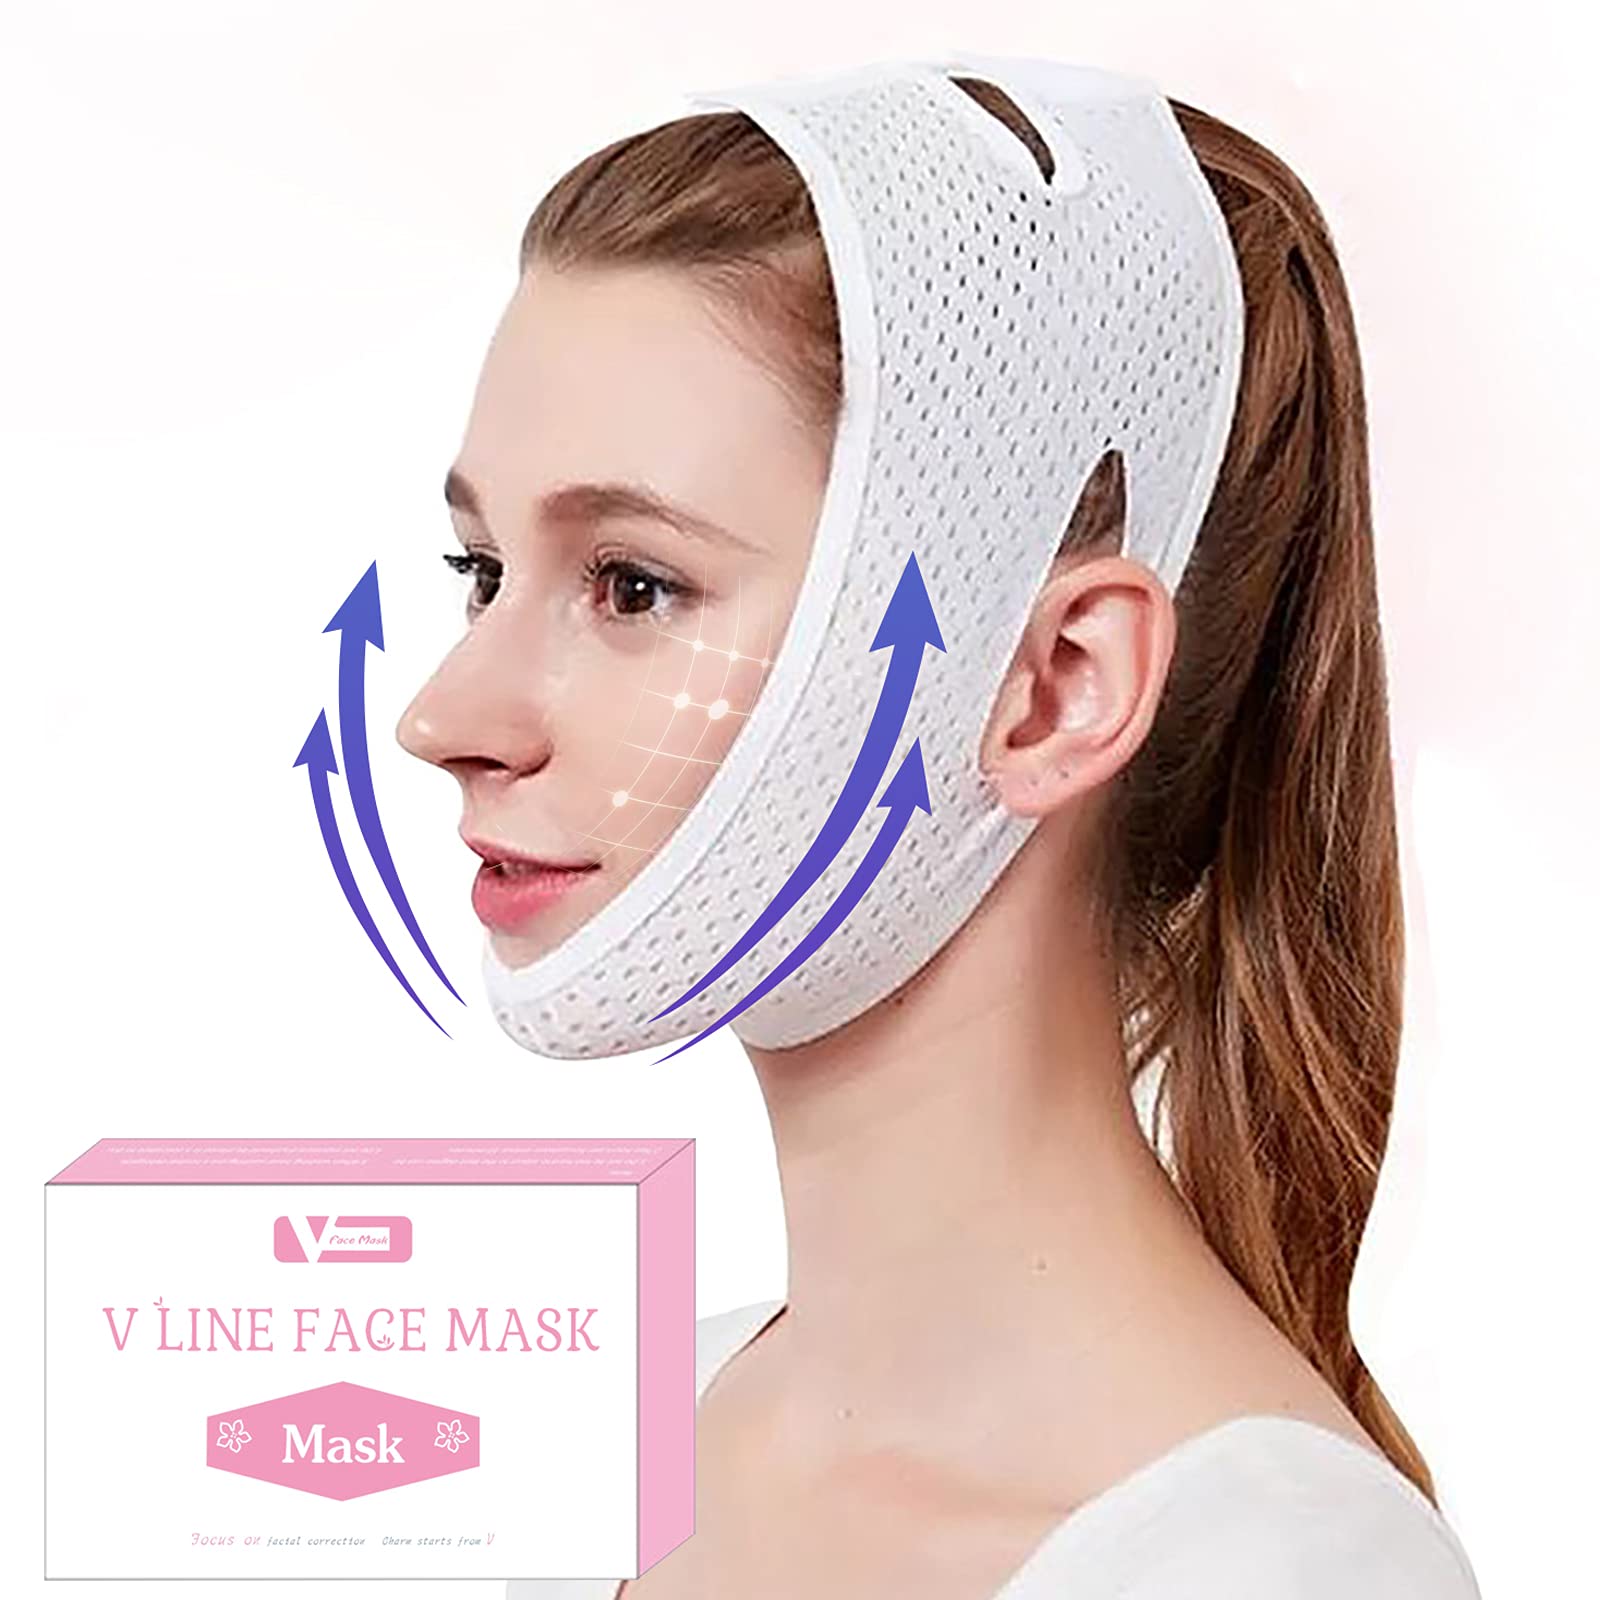 Klyque Reusable V Shaped Slimming Face Mask and Double Chin Reducer Strap,  Skin Care, Lifting Belt, Face Lift, Face Slimmer